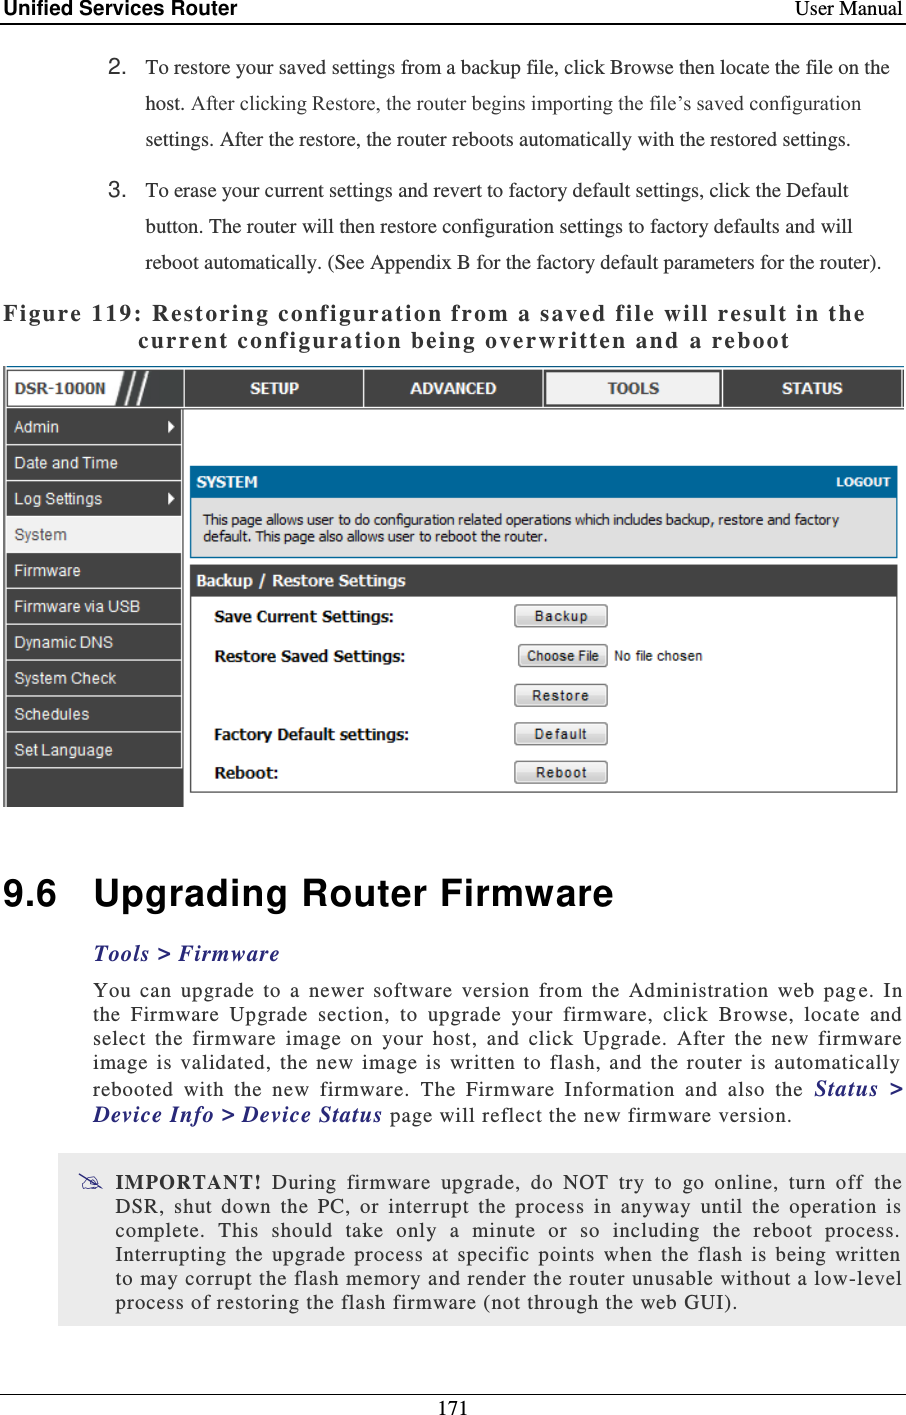 Unified Services Router    User Manual 171  2. To restore your saved settings from a backup file, click Browse then locate the file on the host. After clicking Restore, the router begins importing the file’s saved configuration settings. After the restore, the router reboots automatically with the restored settings. 3. To erase your current settings and revert to factory default settings, click the Default button. The router will then restore configuration settings to factory defaults and will reboot automatically. (See Appendix B for the factory default parameters for the router). Figure 119: Rest oring configur ation from a saved  f ile will result i n the current configura tion  being overwritten and  a reboot    9.6  Upgrading Router Firmware Tools &gt; Firmware You  can  upgrade  to  a  newer  software  version  from  the  Administration  web  pag e.  In the  Firmware  Upgrade  section,  to  upgrade  your  firmware,  click  Browse,  locate  and select  the  firmware  image  on  your  host,  and  click  Upgrade.  After  the  new  firmware image  is  validated,  the  new  image  is  written  to  flash,  and  the  router  is  automatically rebooted  with  the  new  firmware.  The  Firmware  Information  and  also  the  Status  &gt; Device Info &gt; Device Status page will reflect the new firmware version.  IMPORTANT!  During  firmware  upgrade,  do  NOT  try  to  go  online,  turn  off  the DSR,  shut  down  the  PC,  or  interrupt  the  process  in  anyway  until  the  operation  is complete.  This  should  take  only  a  minute  or  so  including  the  reboot  process. Interrupting  the  upgrade  process  at  specific  points  when  the  flash  is  being  written to may corrupt the flash memory and render th e router unusable without a low-level process of restoring the flash firmware (not through the web GUI).  